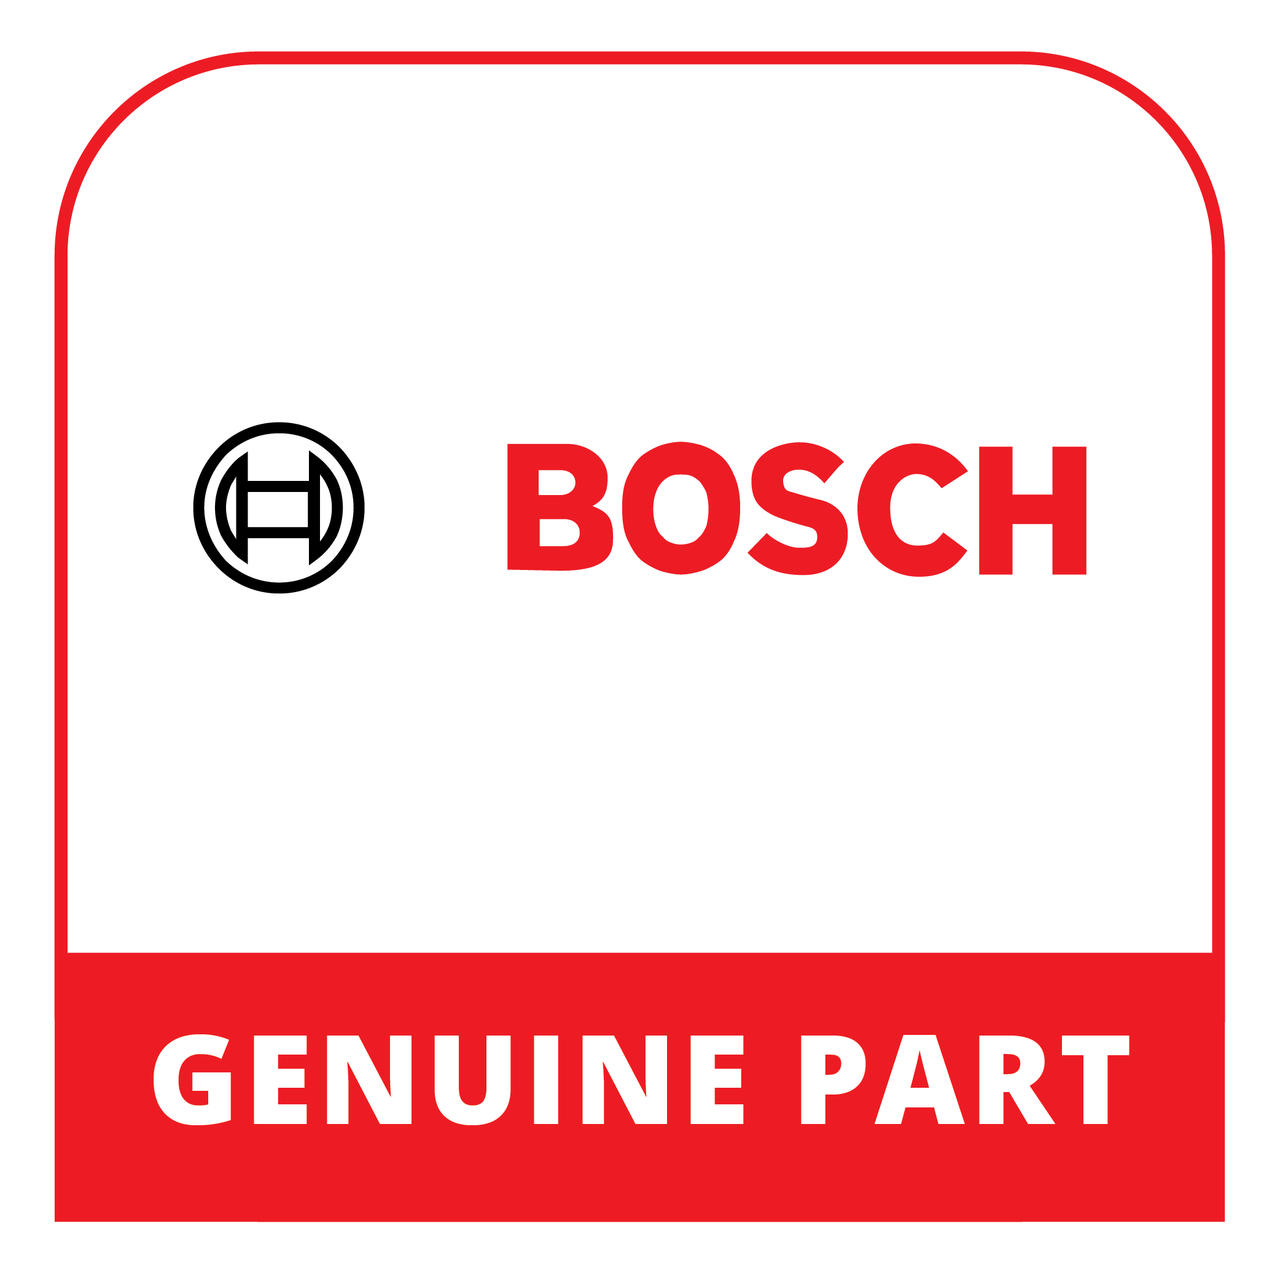 Bosch (Thermador) 11032984 - Gas Tap - Genuine Bosch (Thermador) Part